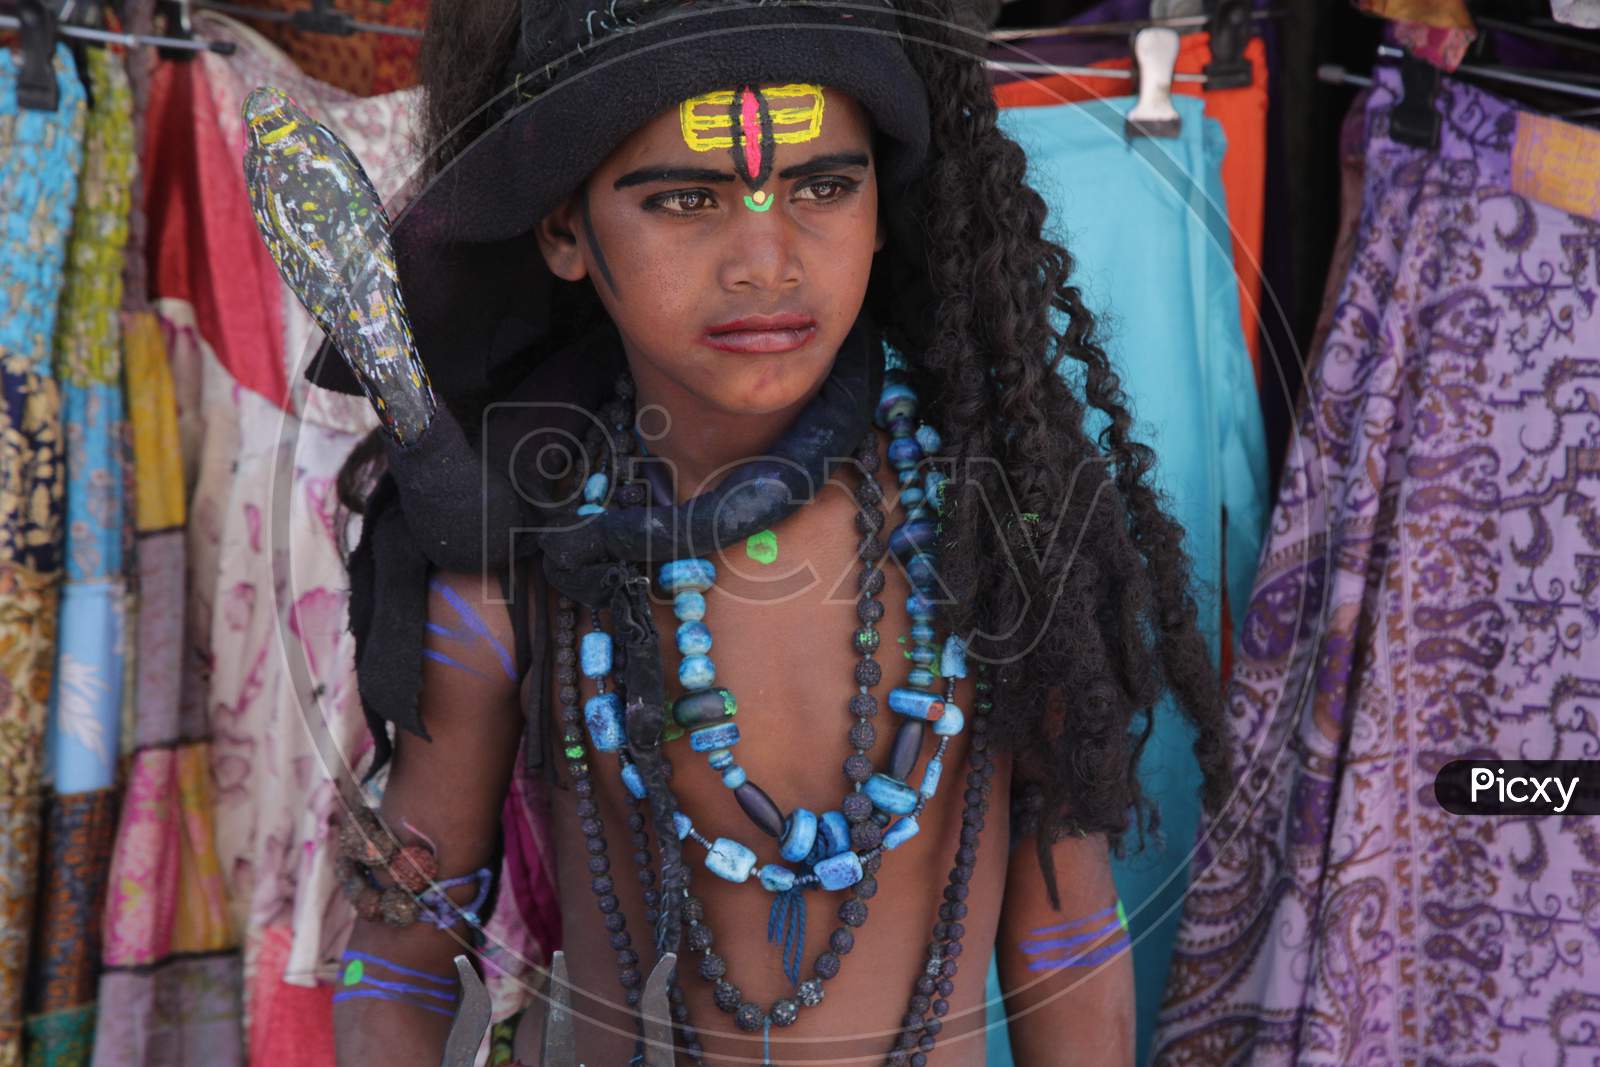 Indian boy dressed up as Lord Shiva